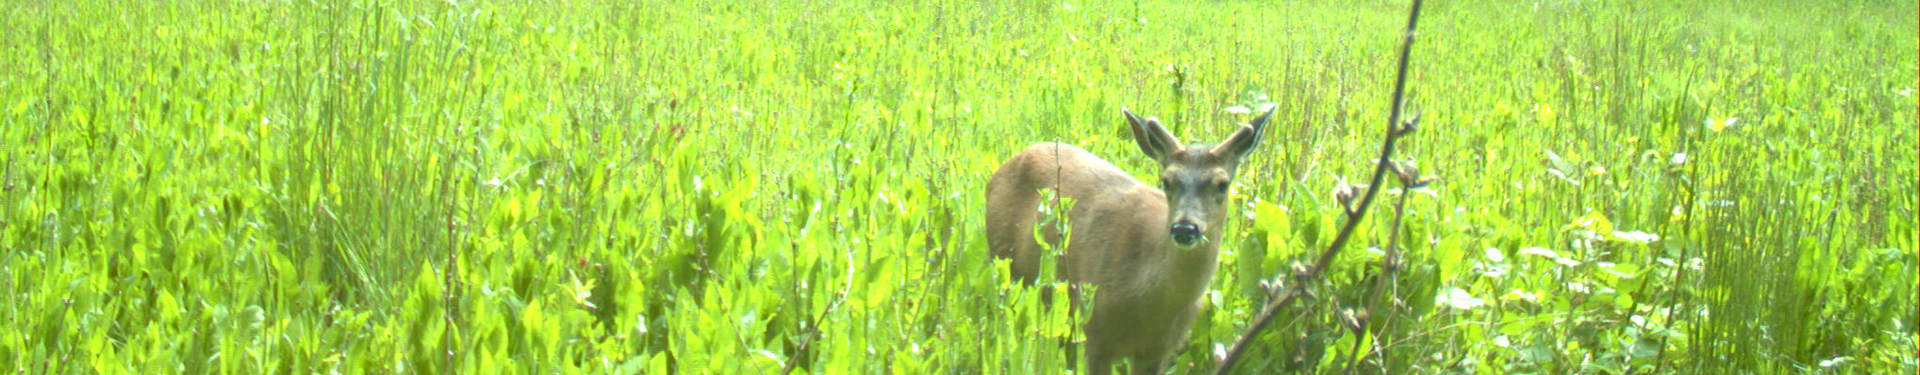 Tulalip Natural Resources Department image of deer in the wild